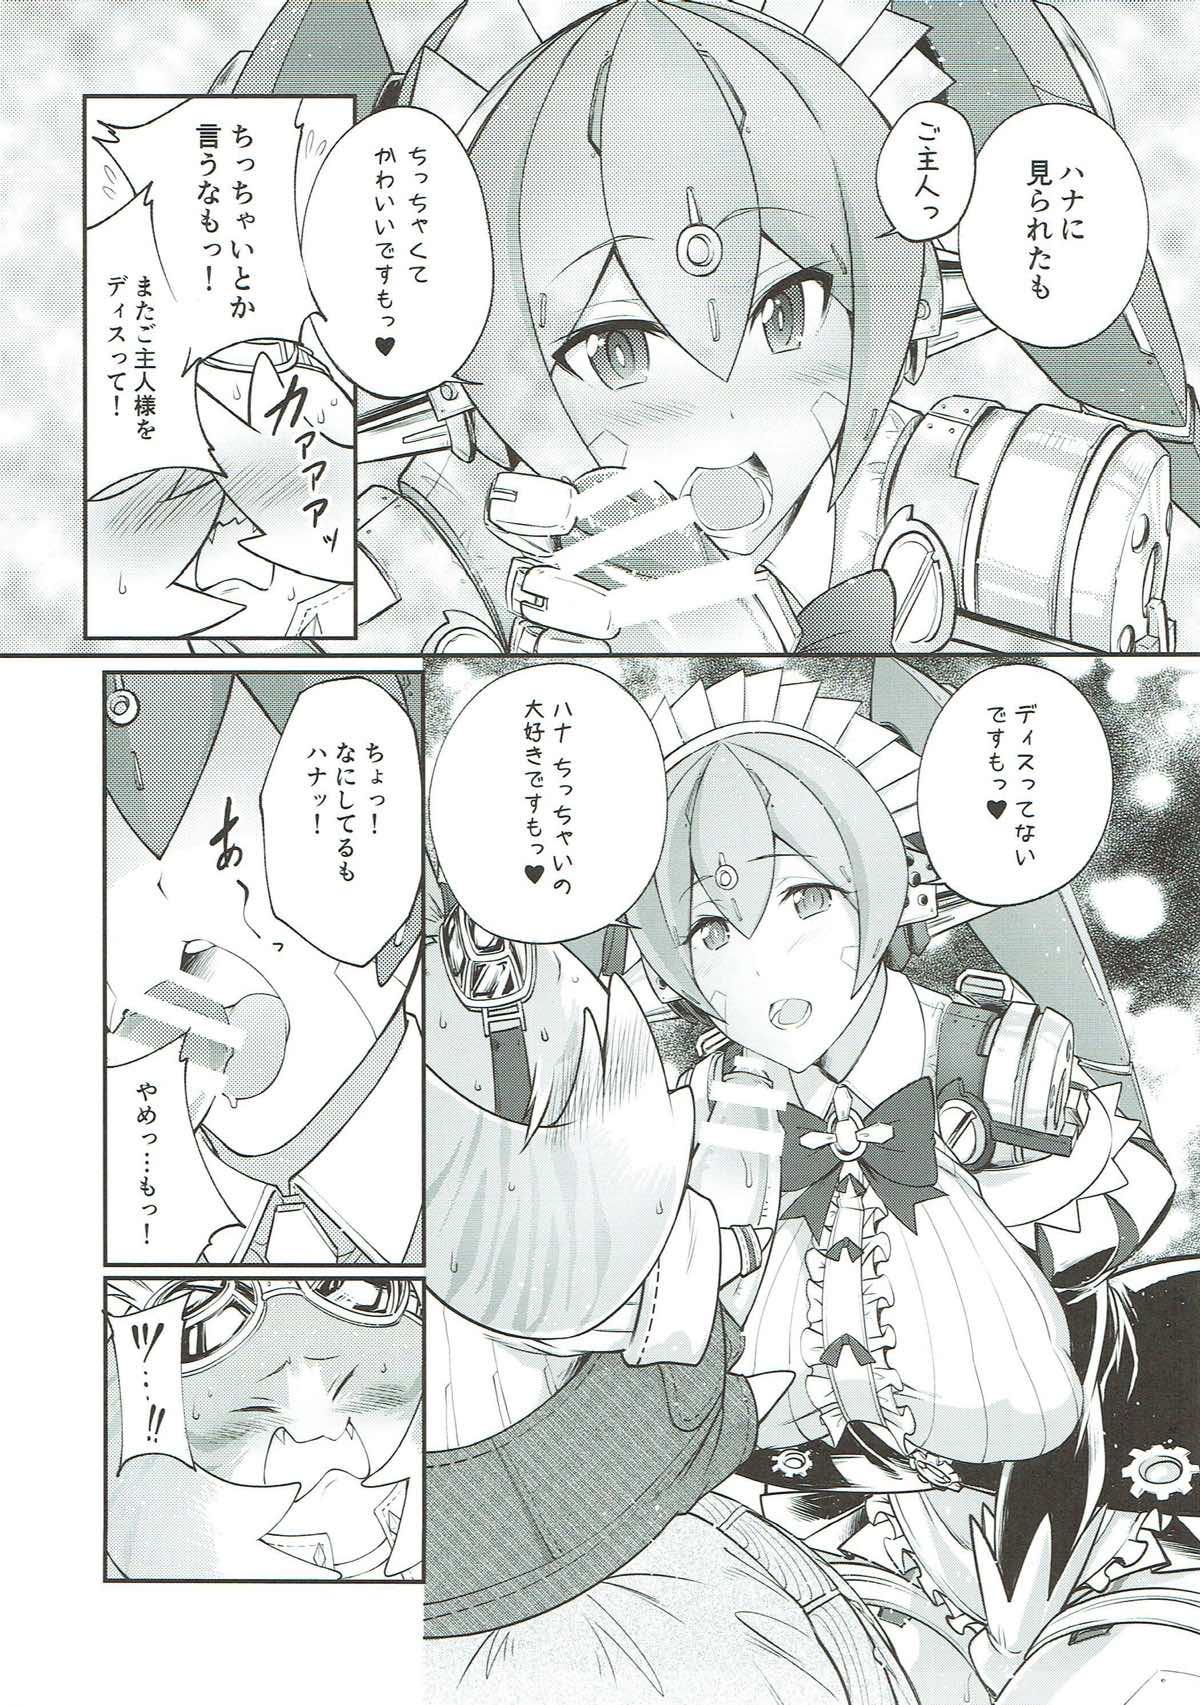 Lesbians Tiger x Flower - Xenoblade chronicles 2 Highheels - Page 6